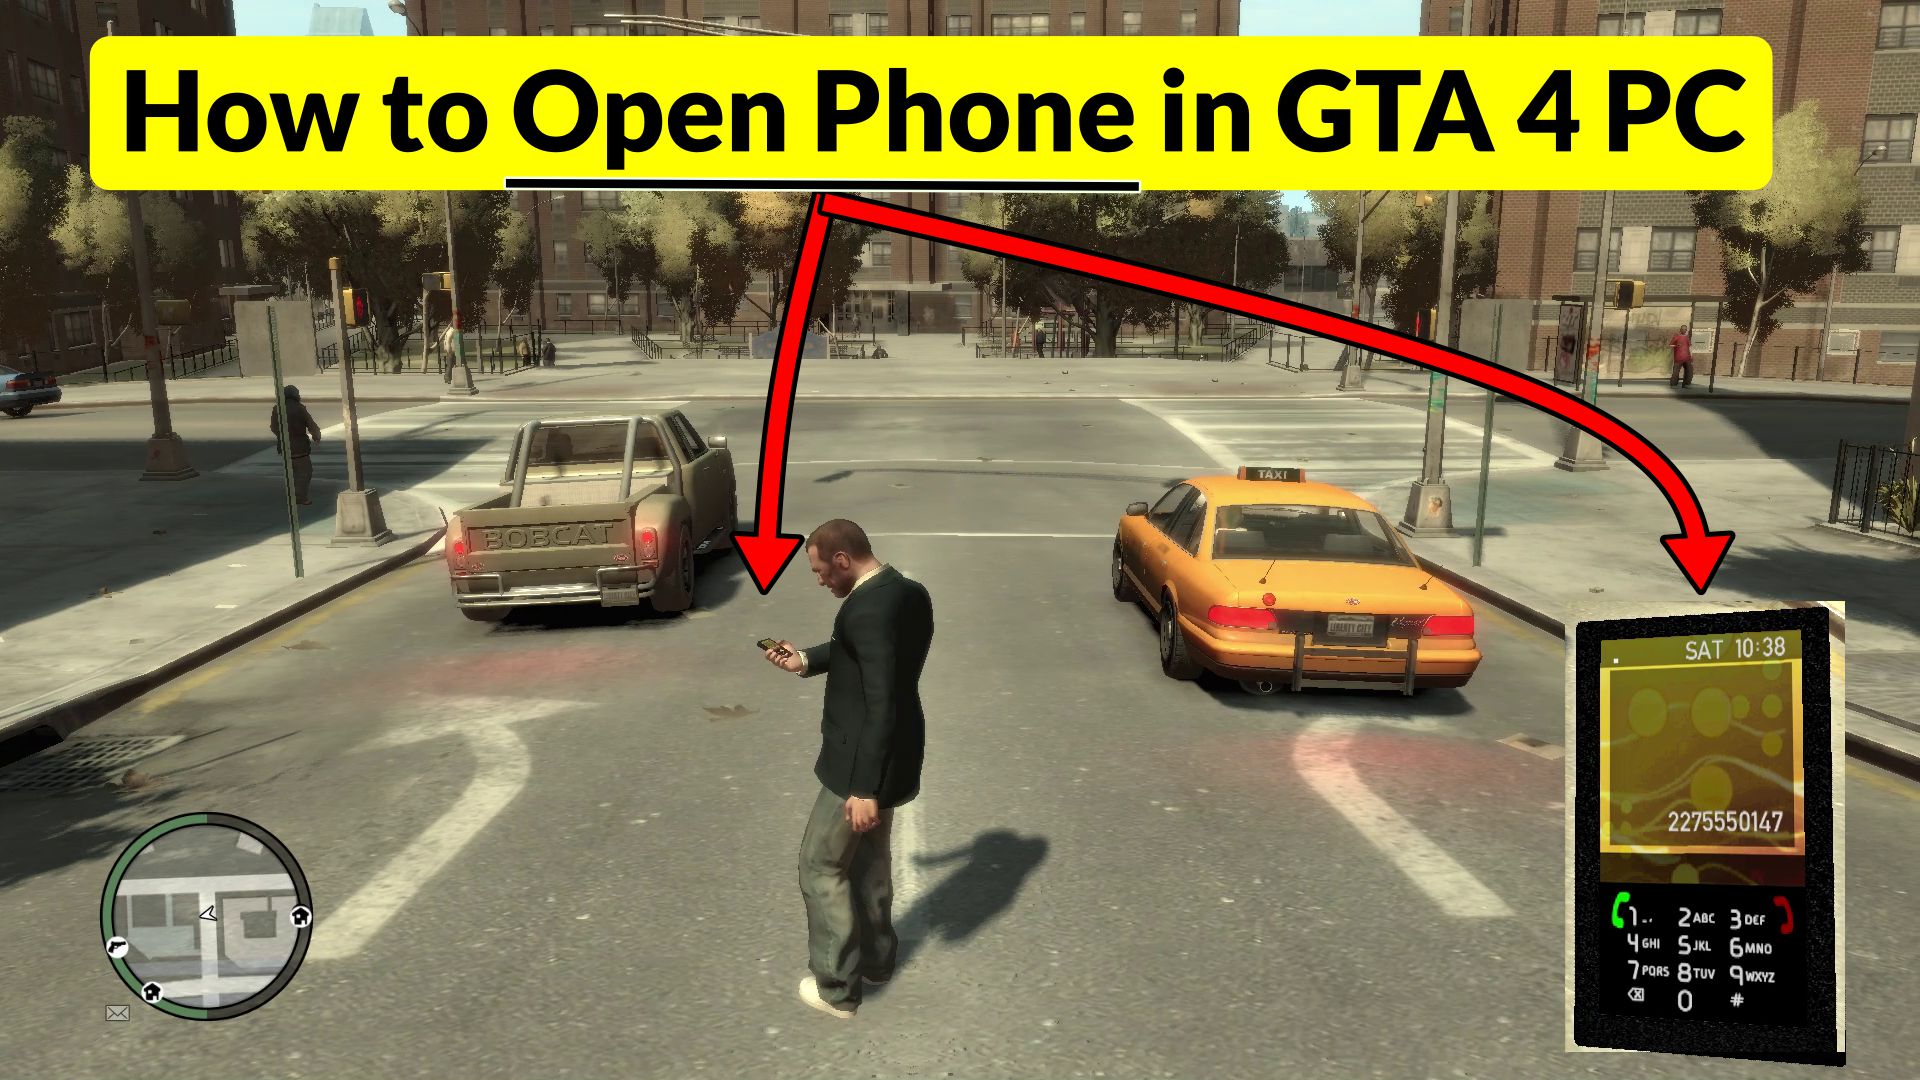 how to Open Phone in GTA 4 PC - by which button